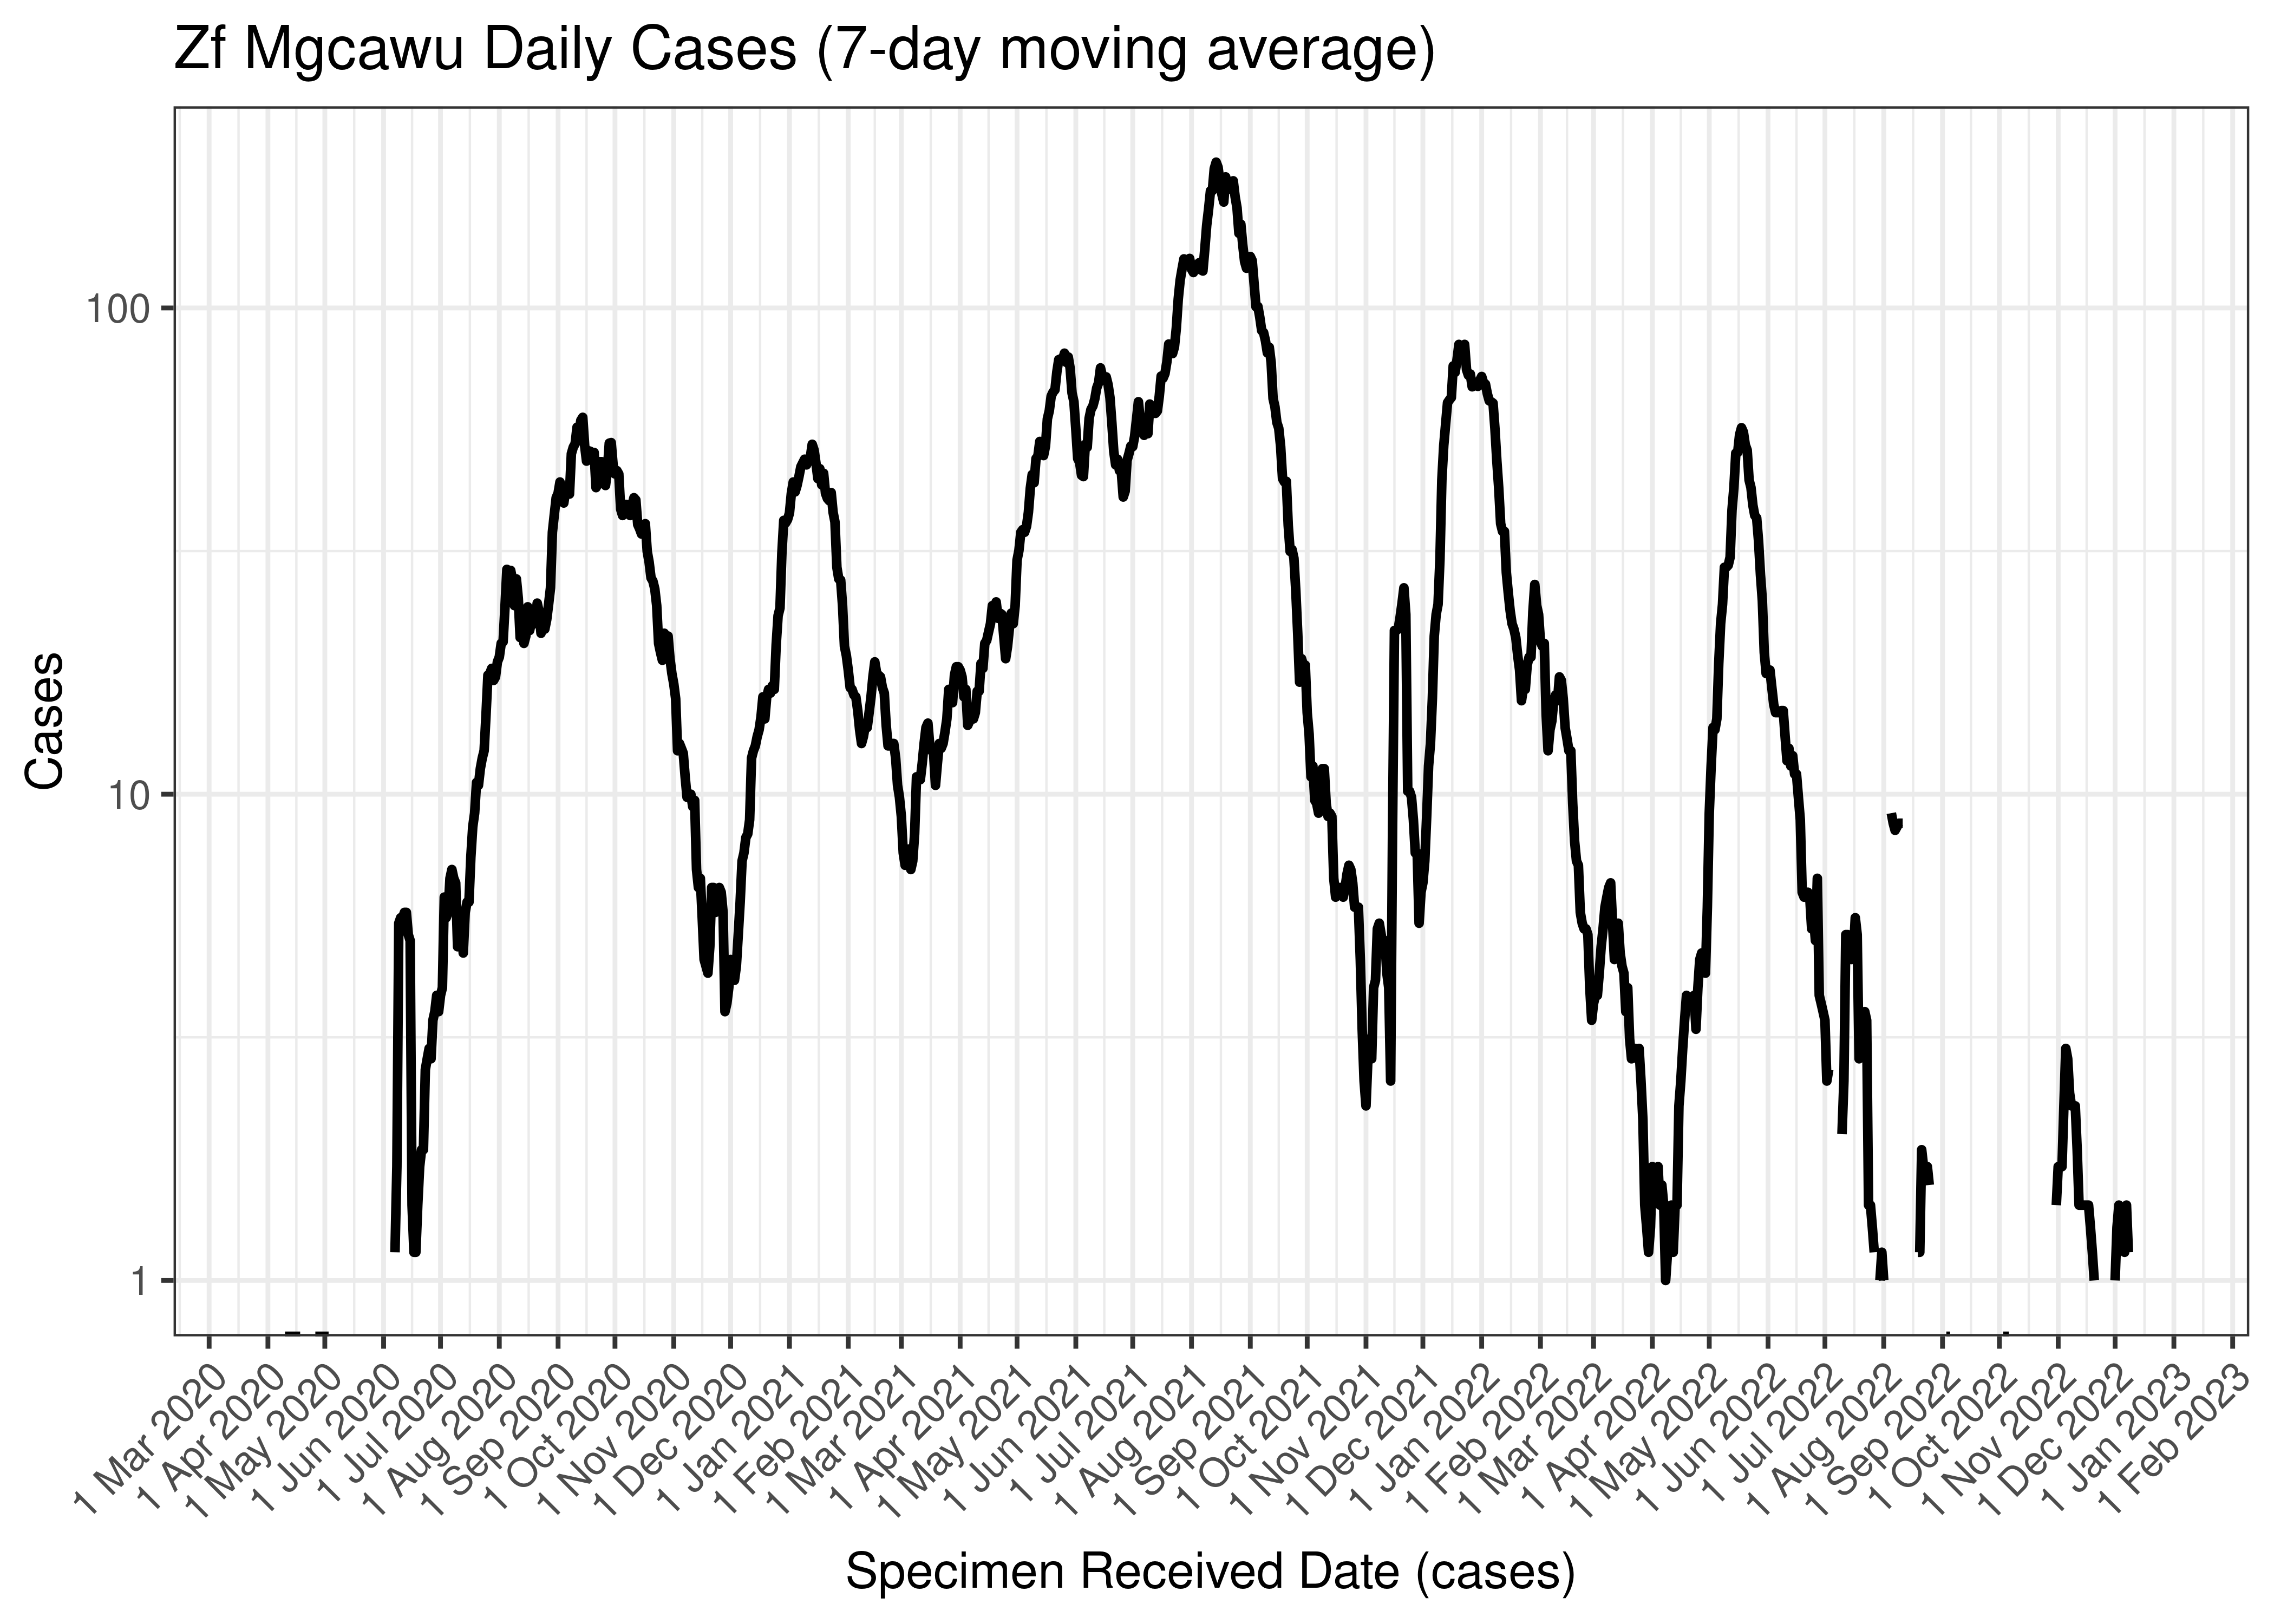 Zf Mgcawu Daily Cases (7-day moving average)